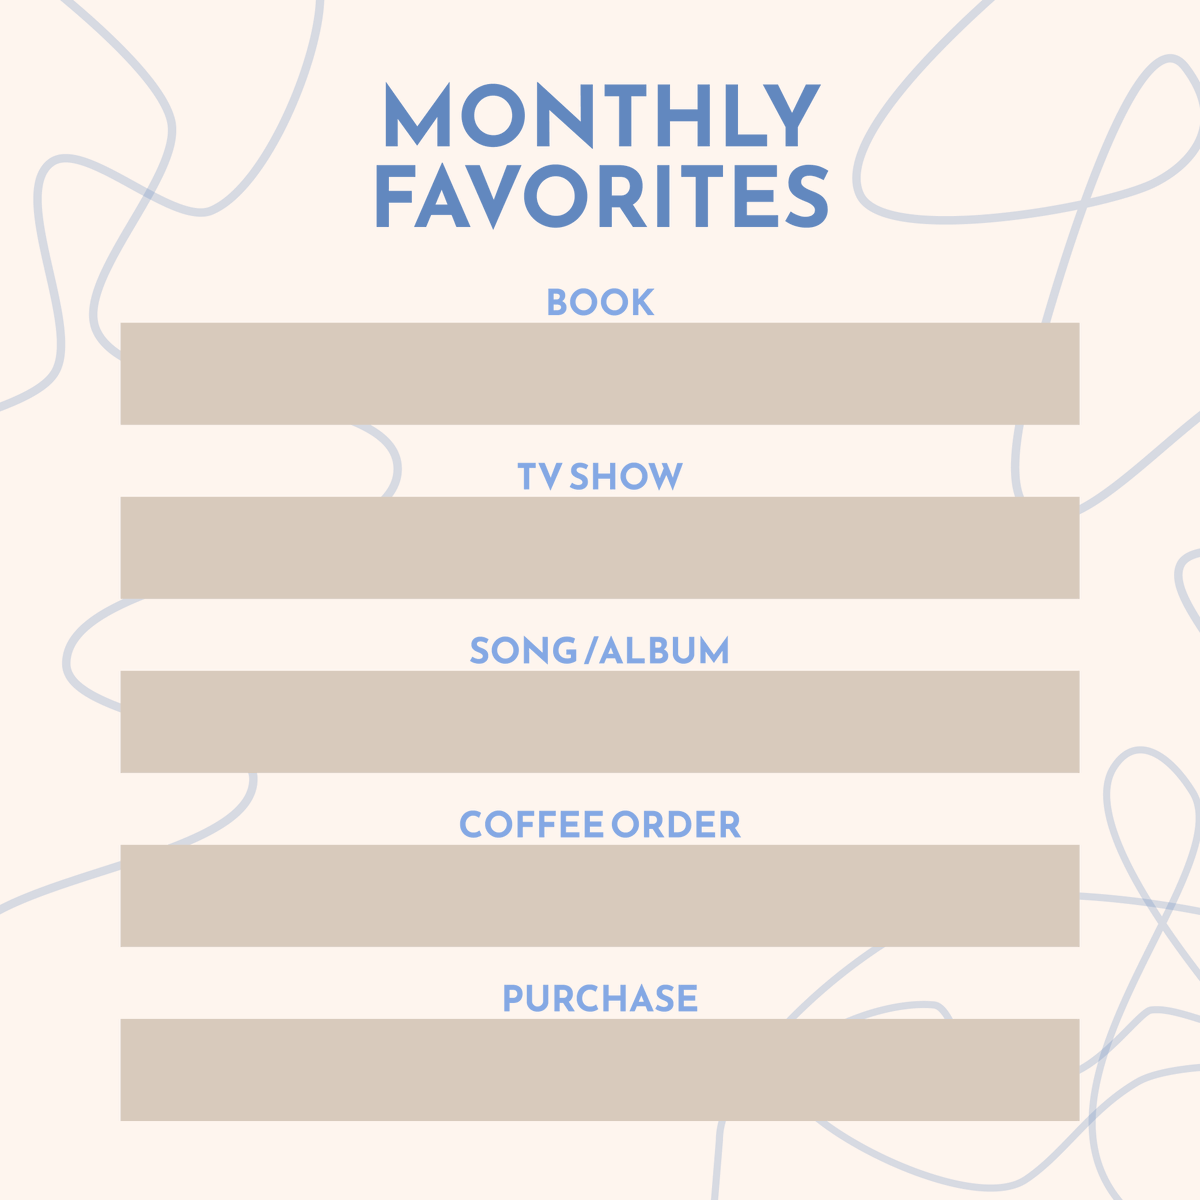 What are a few things you've been loving this month? #MonthlyFavorites
pattylumpkin@callcarpenter.com